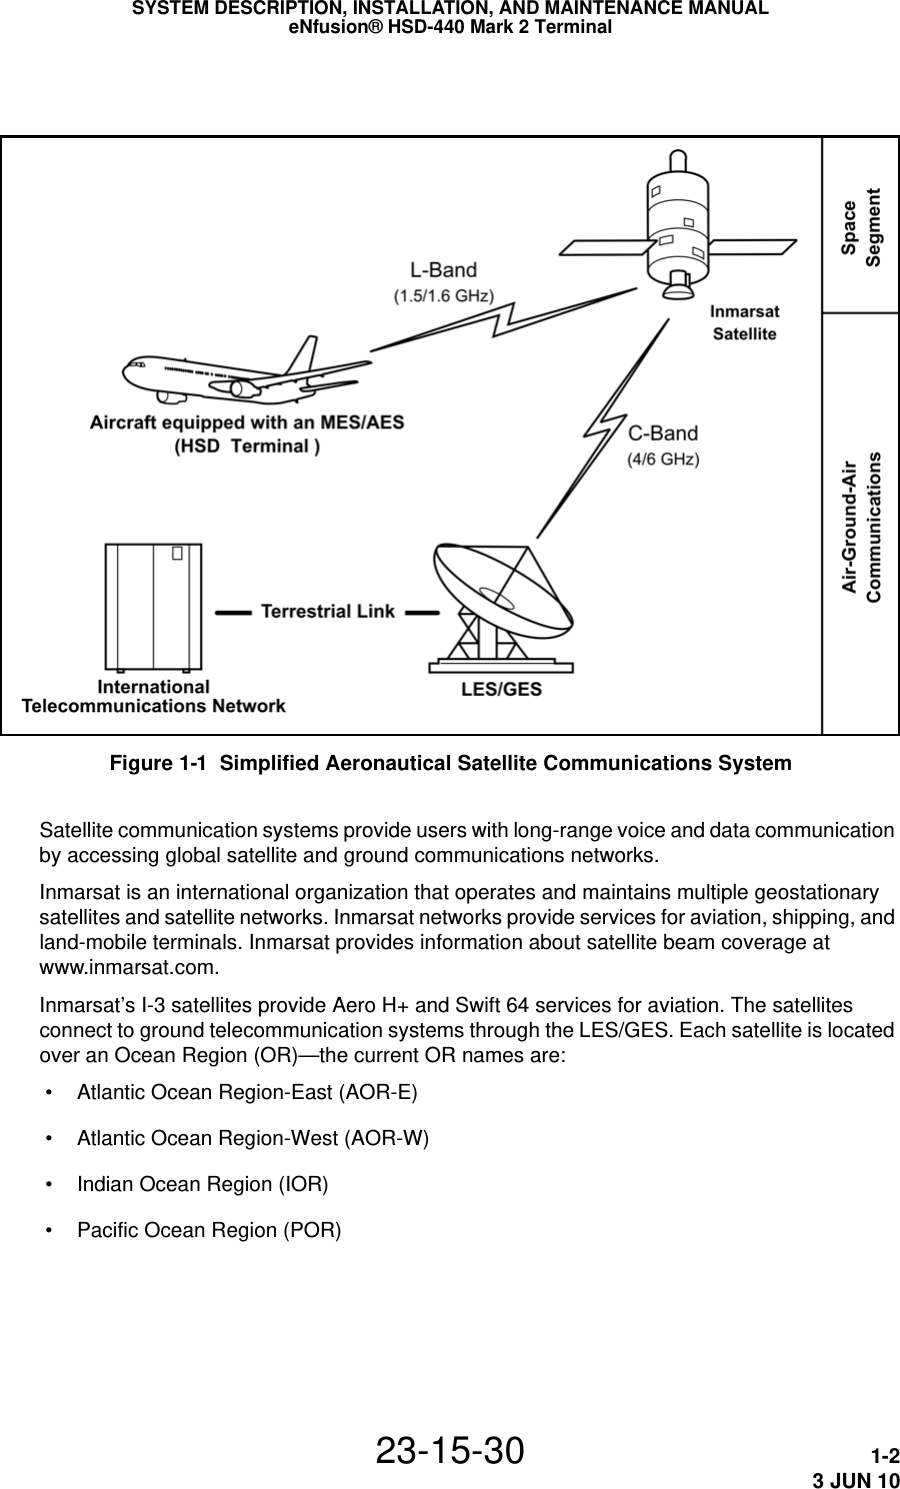 Figure 1-1  Simplified Aeronautical Satellite Communications SystemSYSTEM DESCRIPTION, INSTALLATION, AND MAINTENANCE MANUALeNfusion® HSD-440 Mark 2 Terminal23-15-30 1-23 JUN 10Satellite communication systems provide users with long-range voice and data communication by accessing global satellite and ground communications networks.Inmarsat is an international organization that operates and maintains multiple geostationary satellites and satellite networks. Inmarsat networks provide services for aviation, shipping, and land-mobile terminals. Inmarsat provides information about satellite beam coverage at www.inmarsat.com.Inmarsat’s I-3 satellites provide Aero H+ and Swift 64 services for aviation. The satellites connect to ground telecommunication systems through the LES/GES. Each satellite is located over an Ocean Region (OR)—the current OR names are: • Atlantic Ocean Region-East (AOR-E) • Atlantic Ocean Region-West (AOR-W) • Indian Ocean Region (IOR) • Pacific Ocean Region (POR)